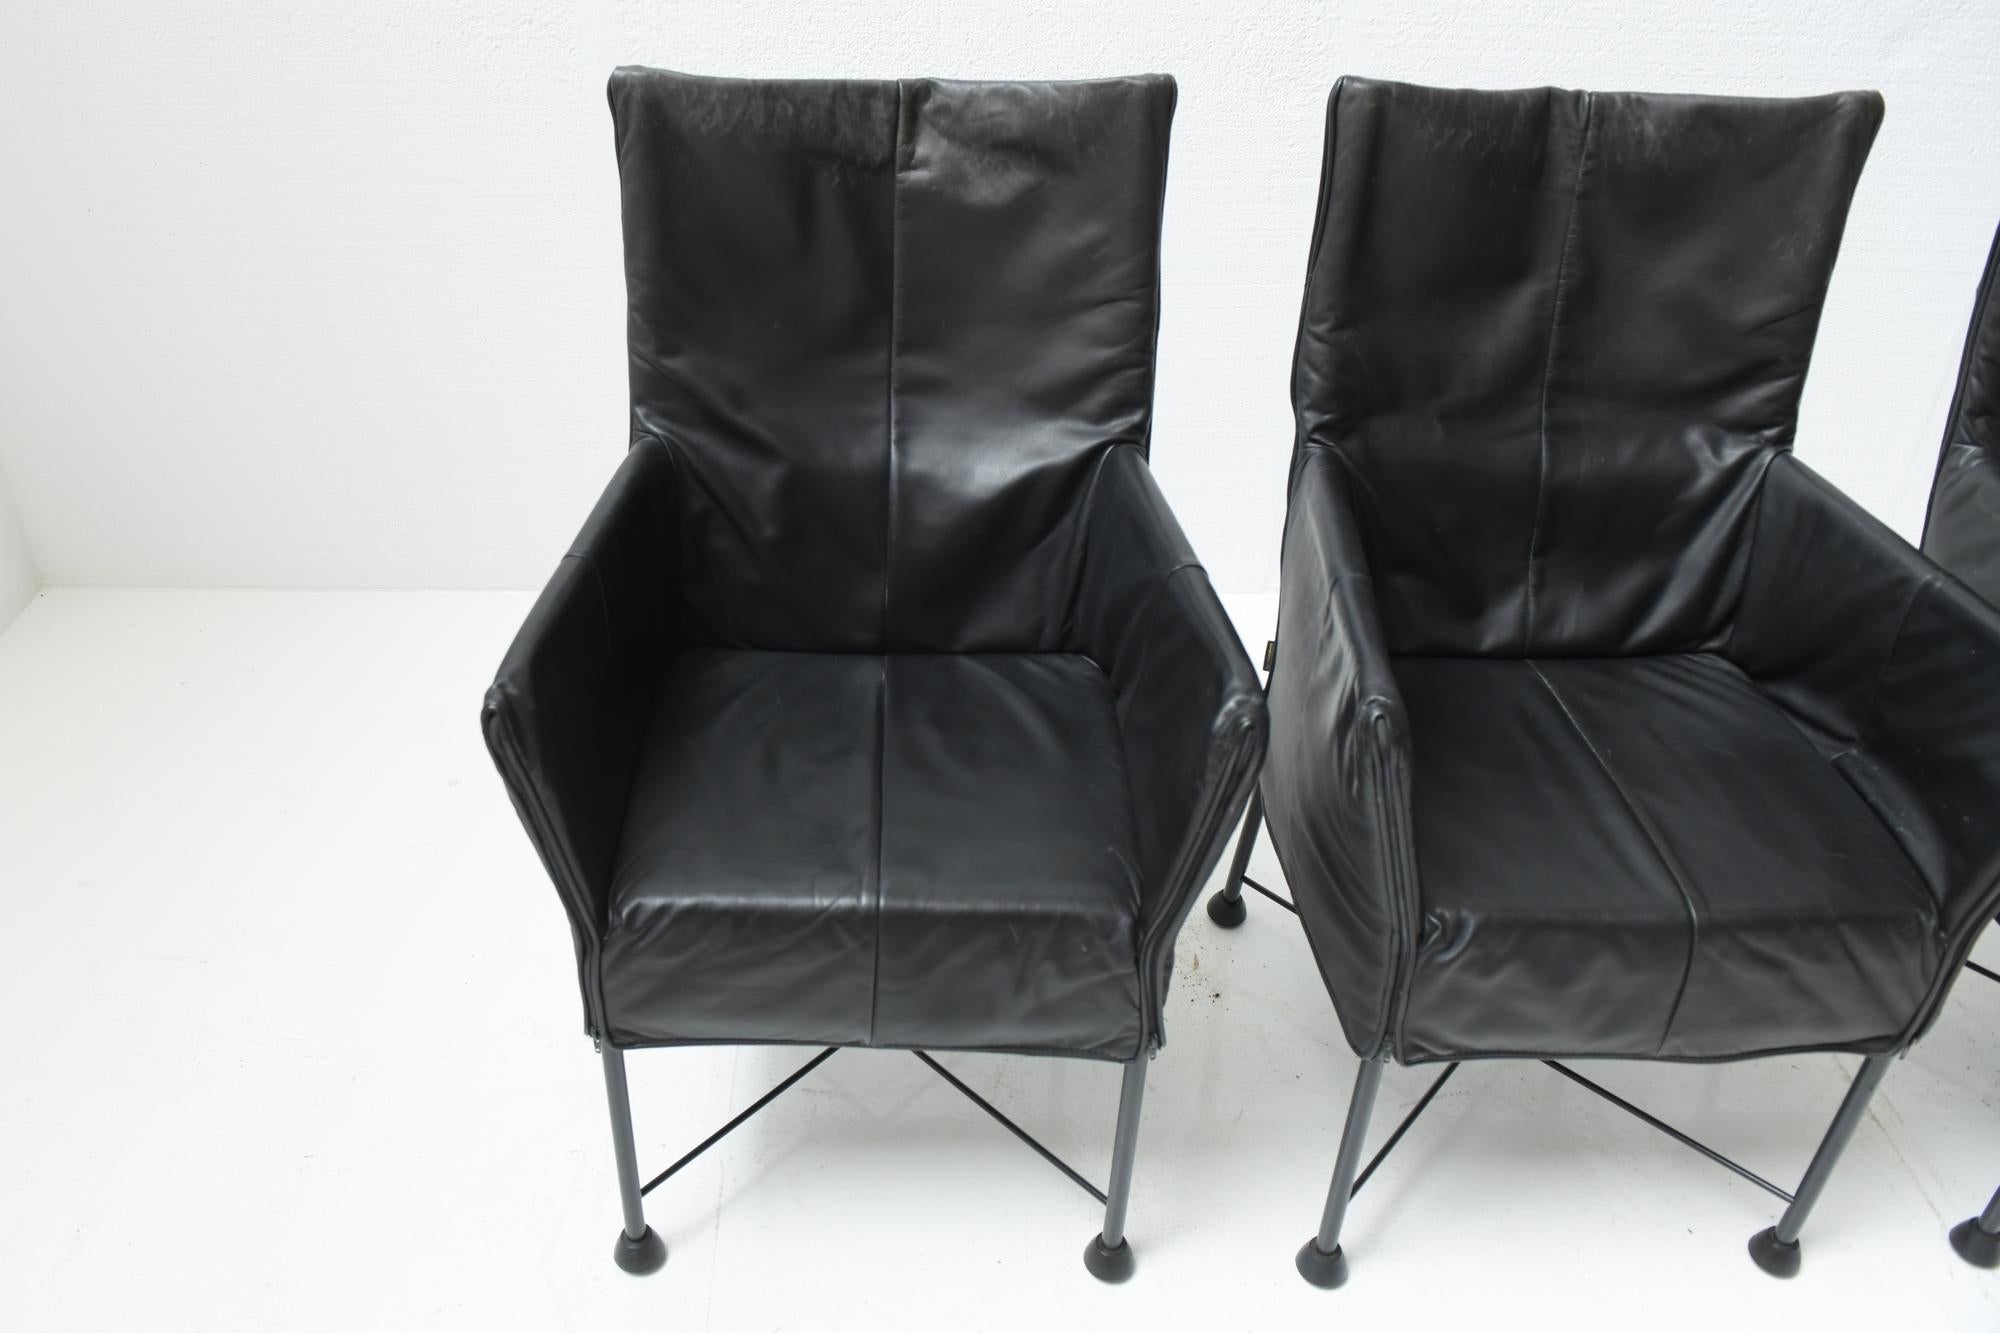 6 x Chaplin Vintage Leather Dining Chairs by Gerard van den Berg for Montis For Sale 4